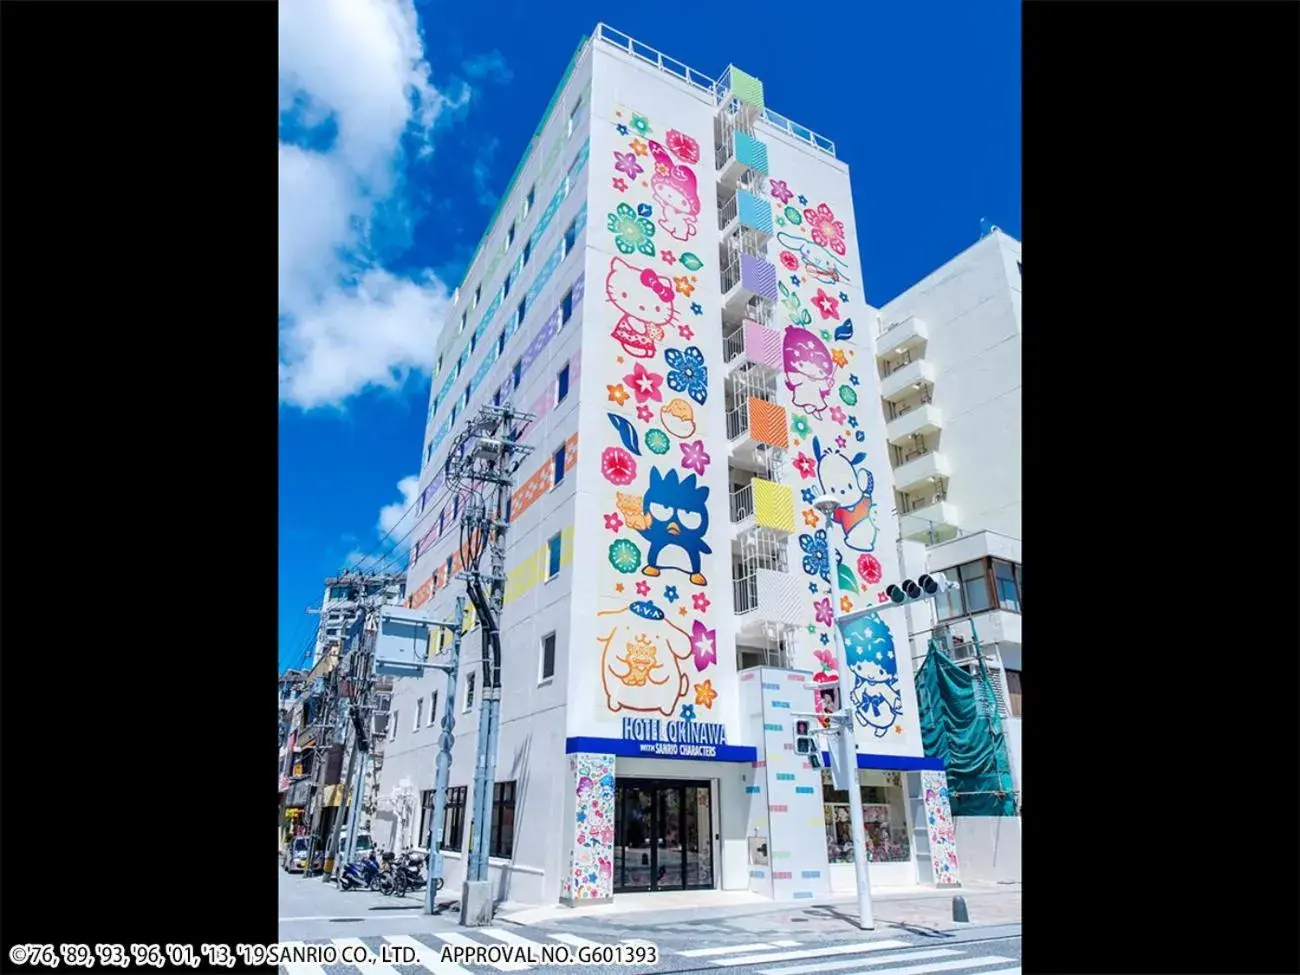 Property Building in Hotel Okinawa With Sanrio Characters